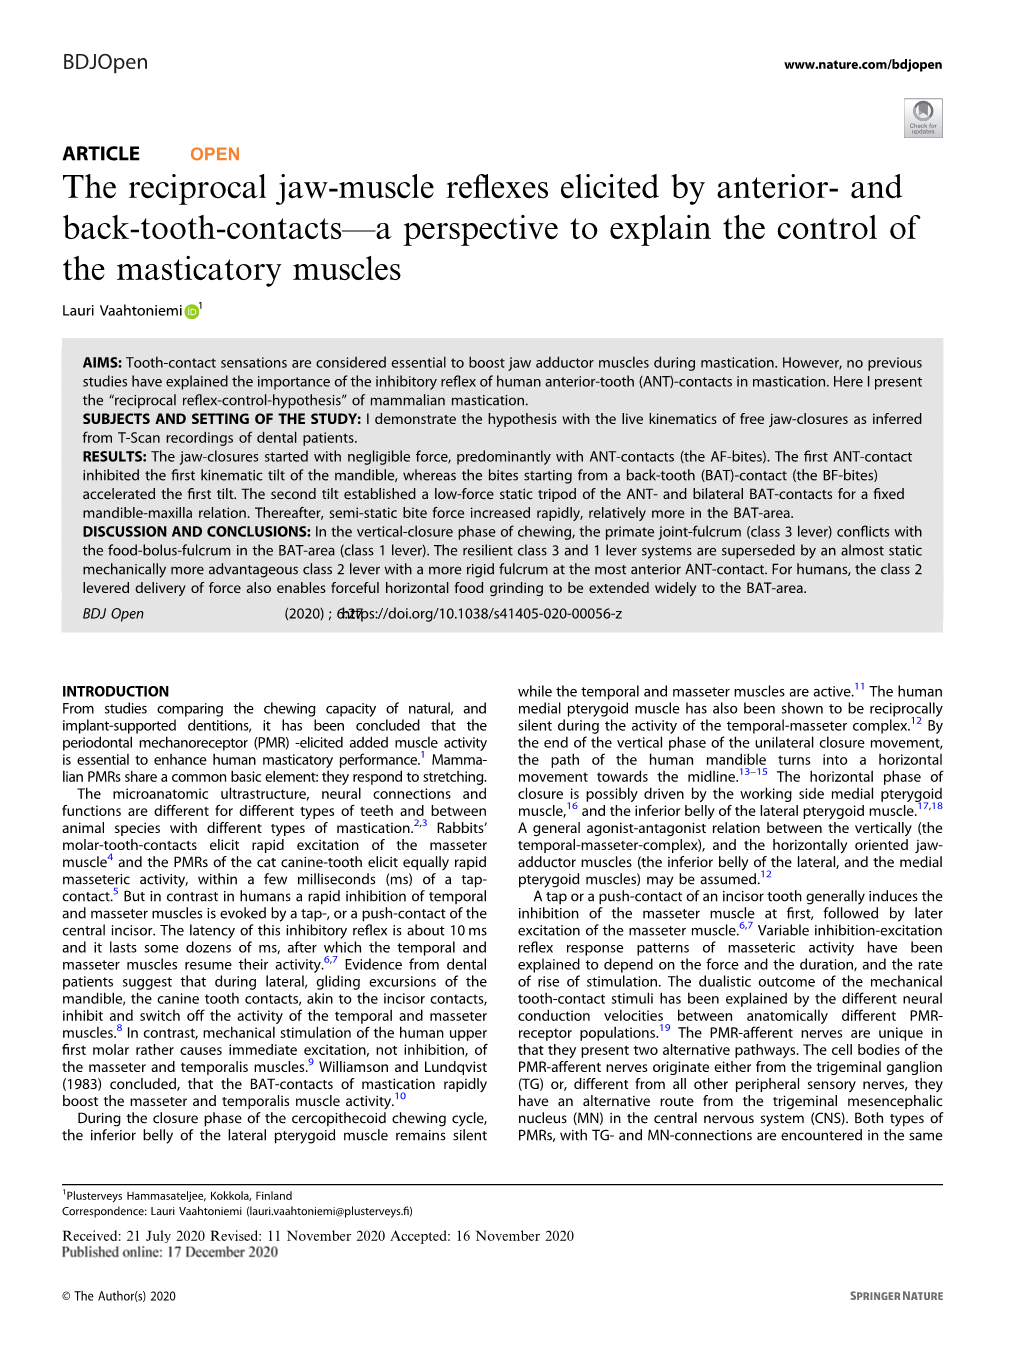 The Reciprocal Jaw-Muscle Reflexes Elicited by Anterior